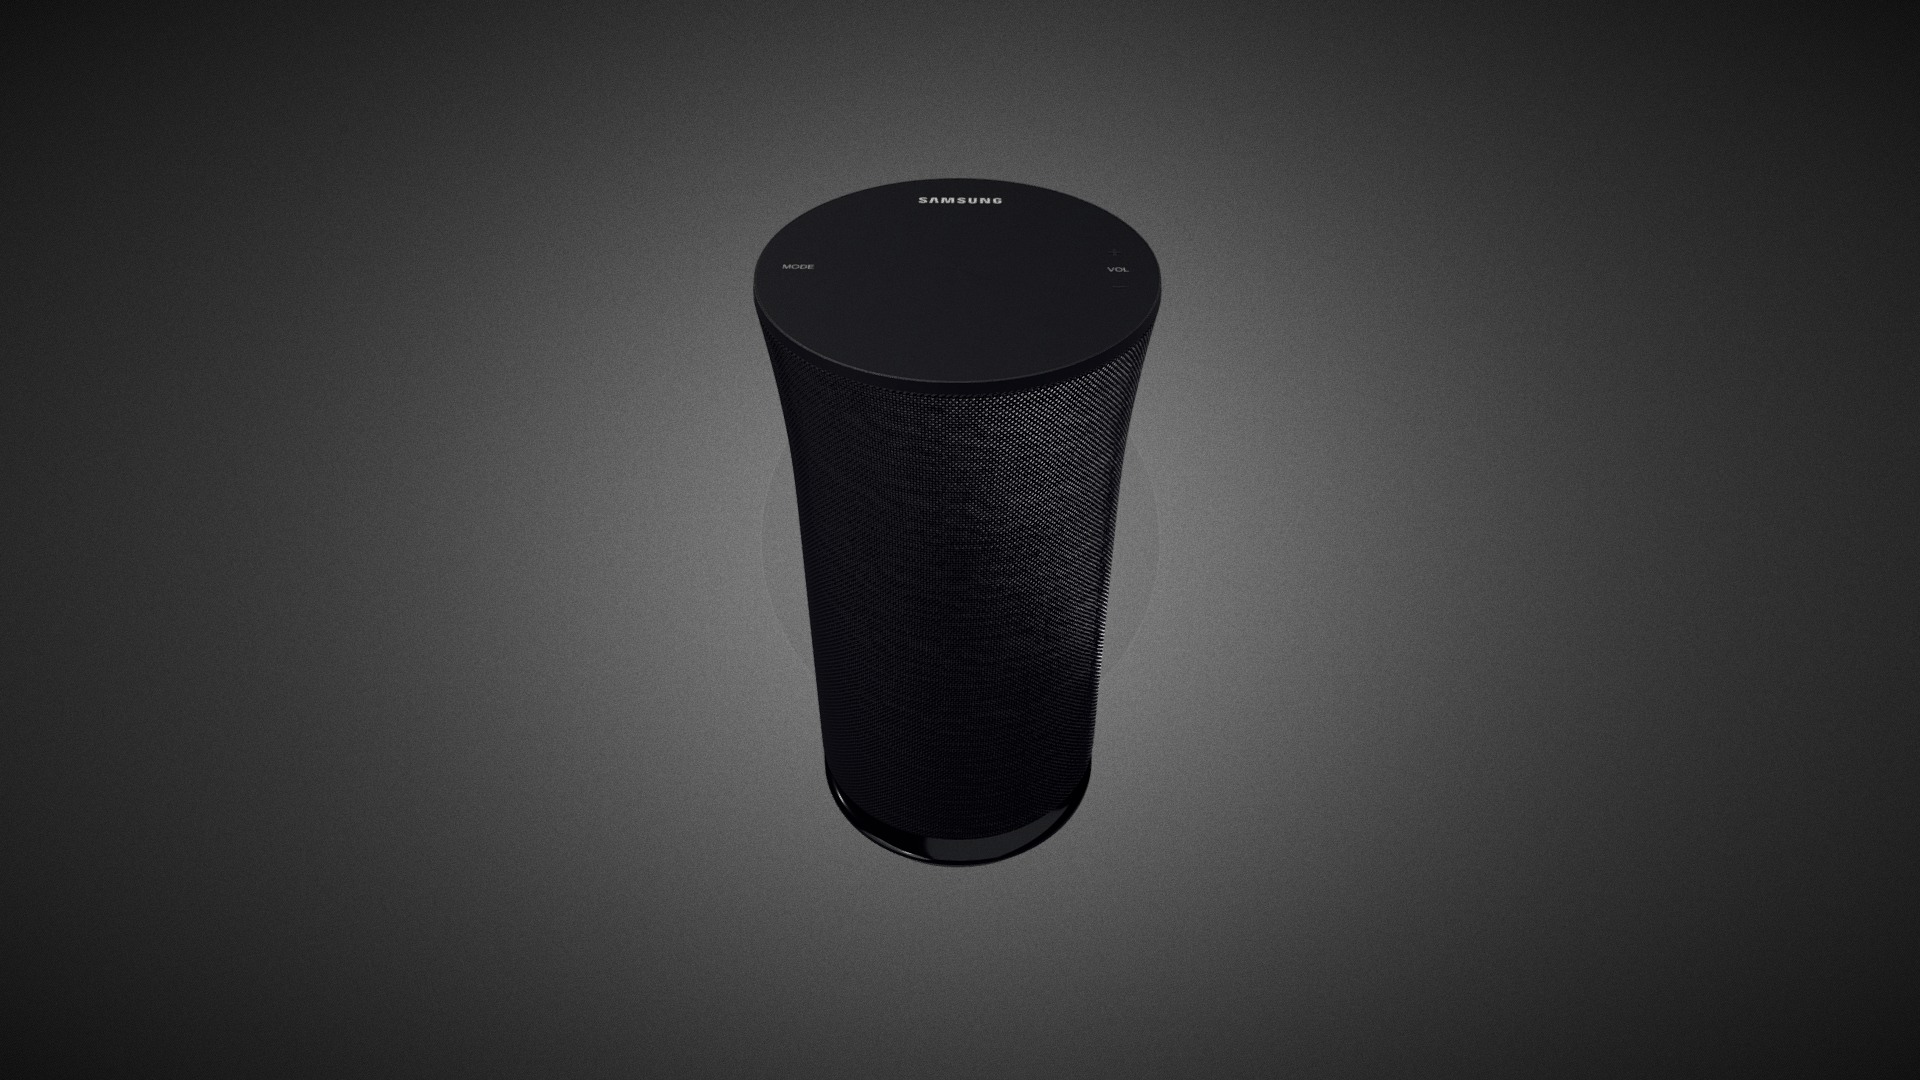 3D model Samsung Radiant360 R3 for Element 3D - This is a 3D model of the Samsung Radiant360 R3 for Element 3D. The 3D model is about a black speaker on a black surface.